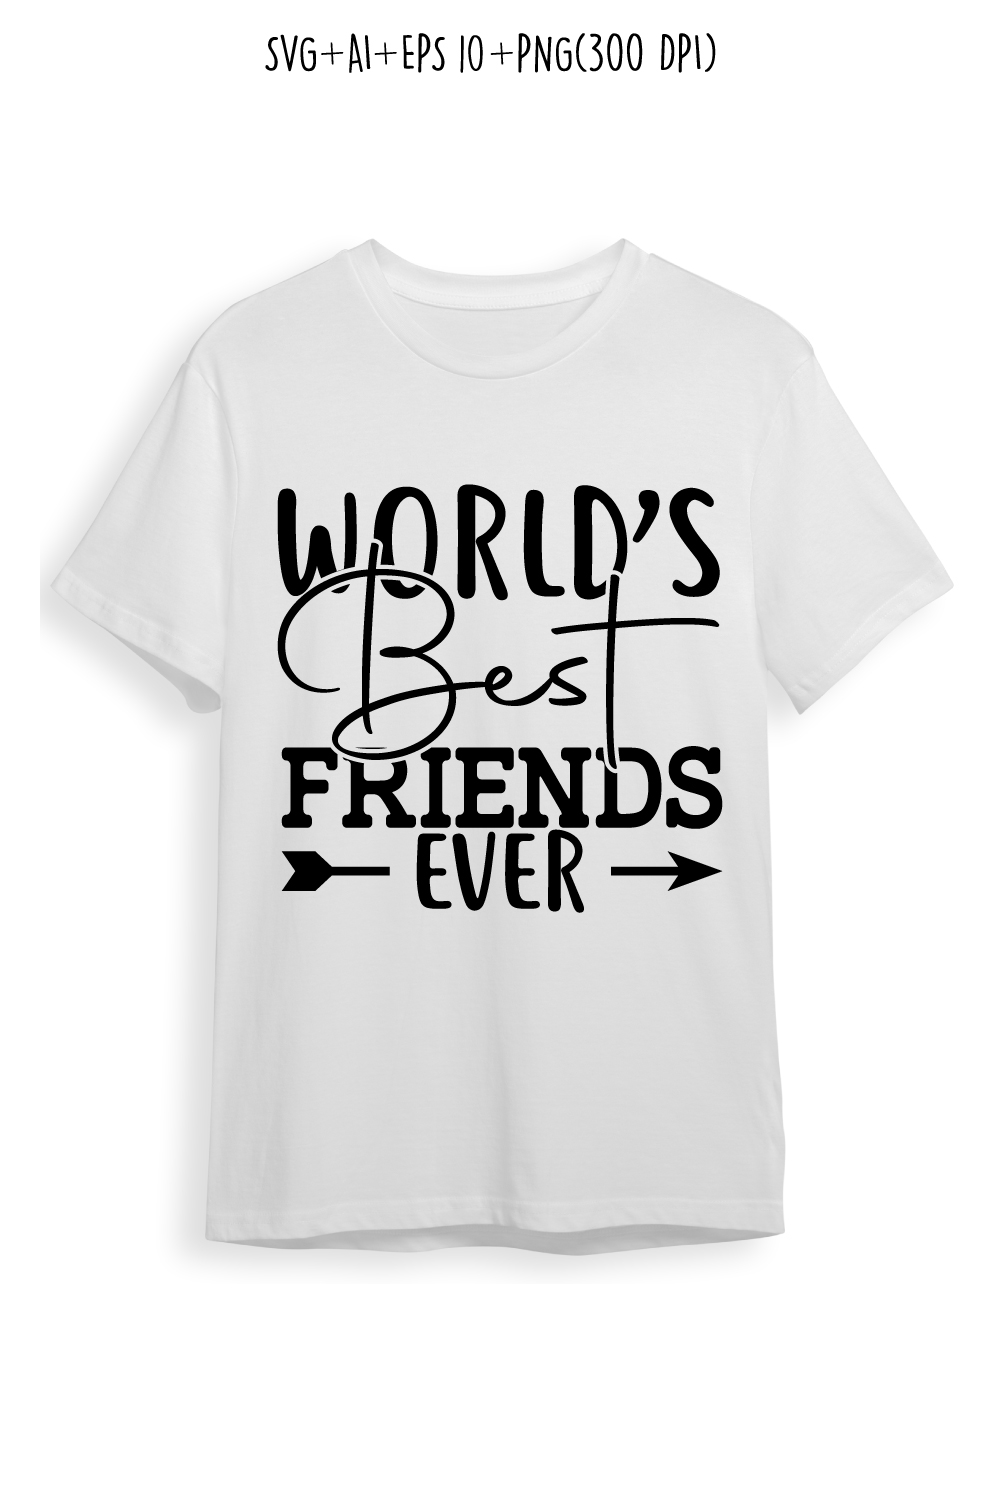 world’s best friends ever SVG design for t-shirts, cards, frame artwork, phone cases, bags, mugs, stickers, tumblers, print, etc pinterest preview image.